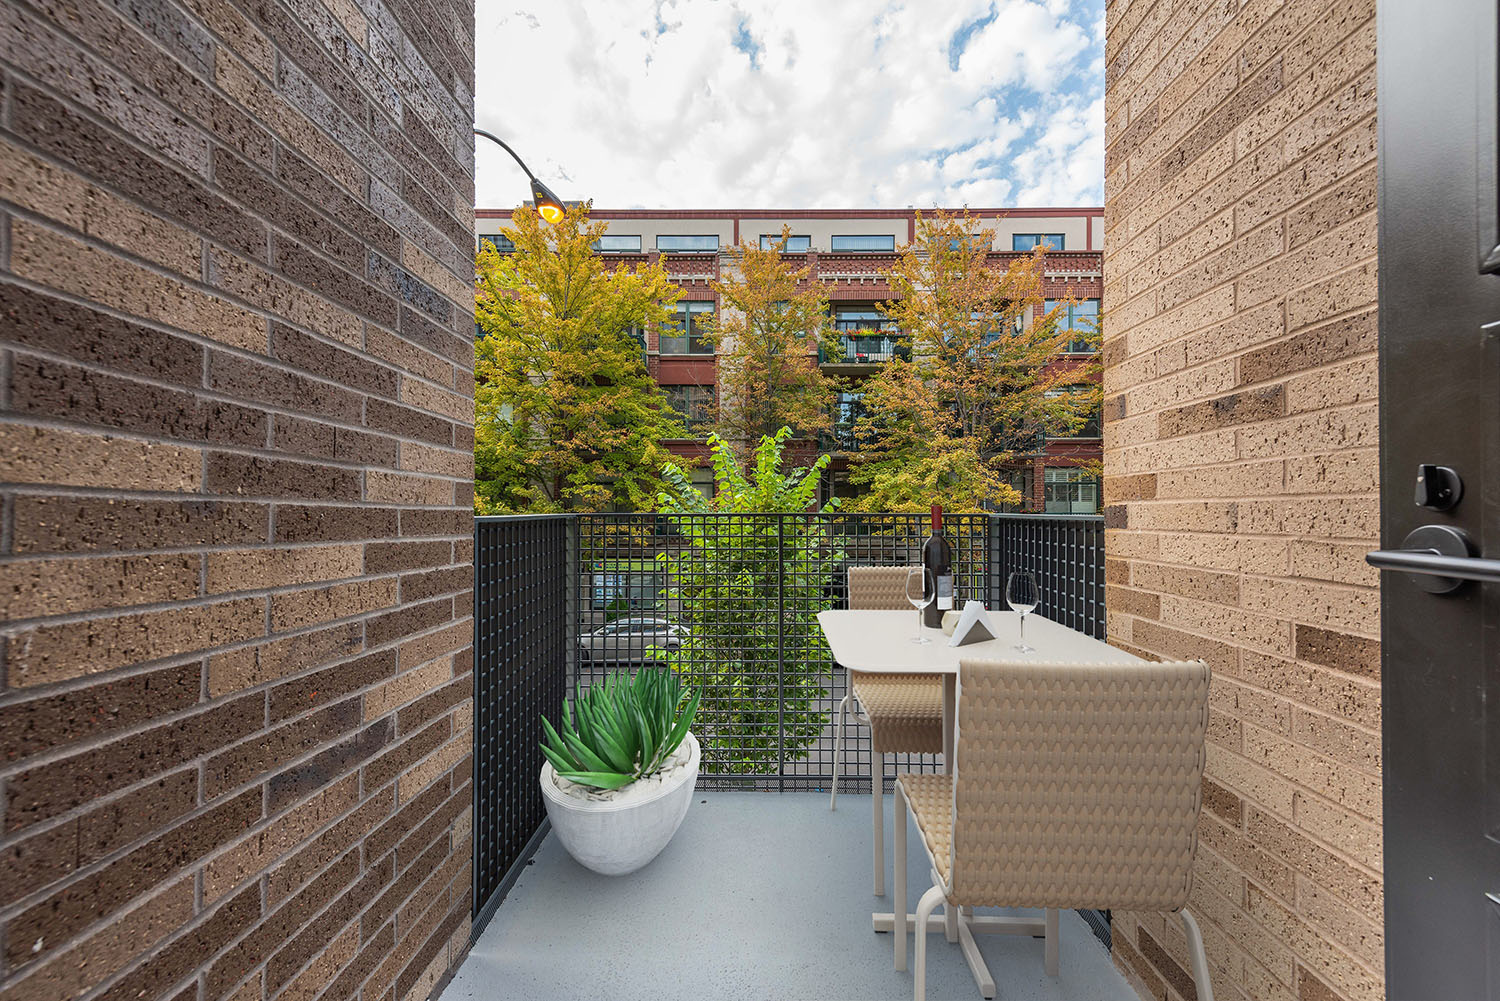 Second-Floor Balcony at Porte Townhomes. Image by Lendlease and The John Buck Company